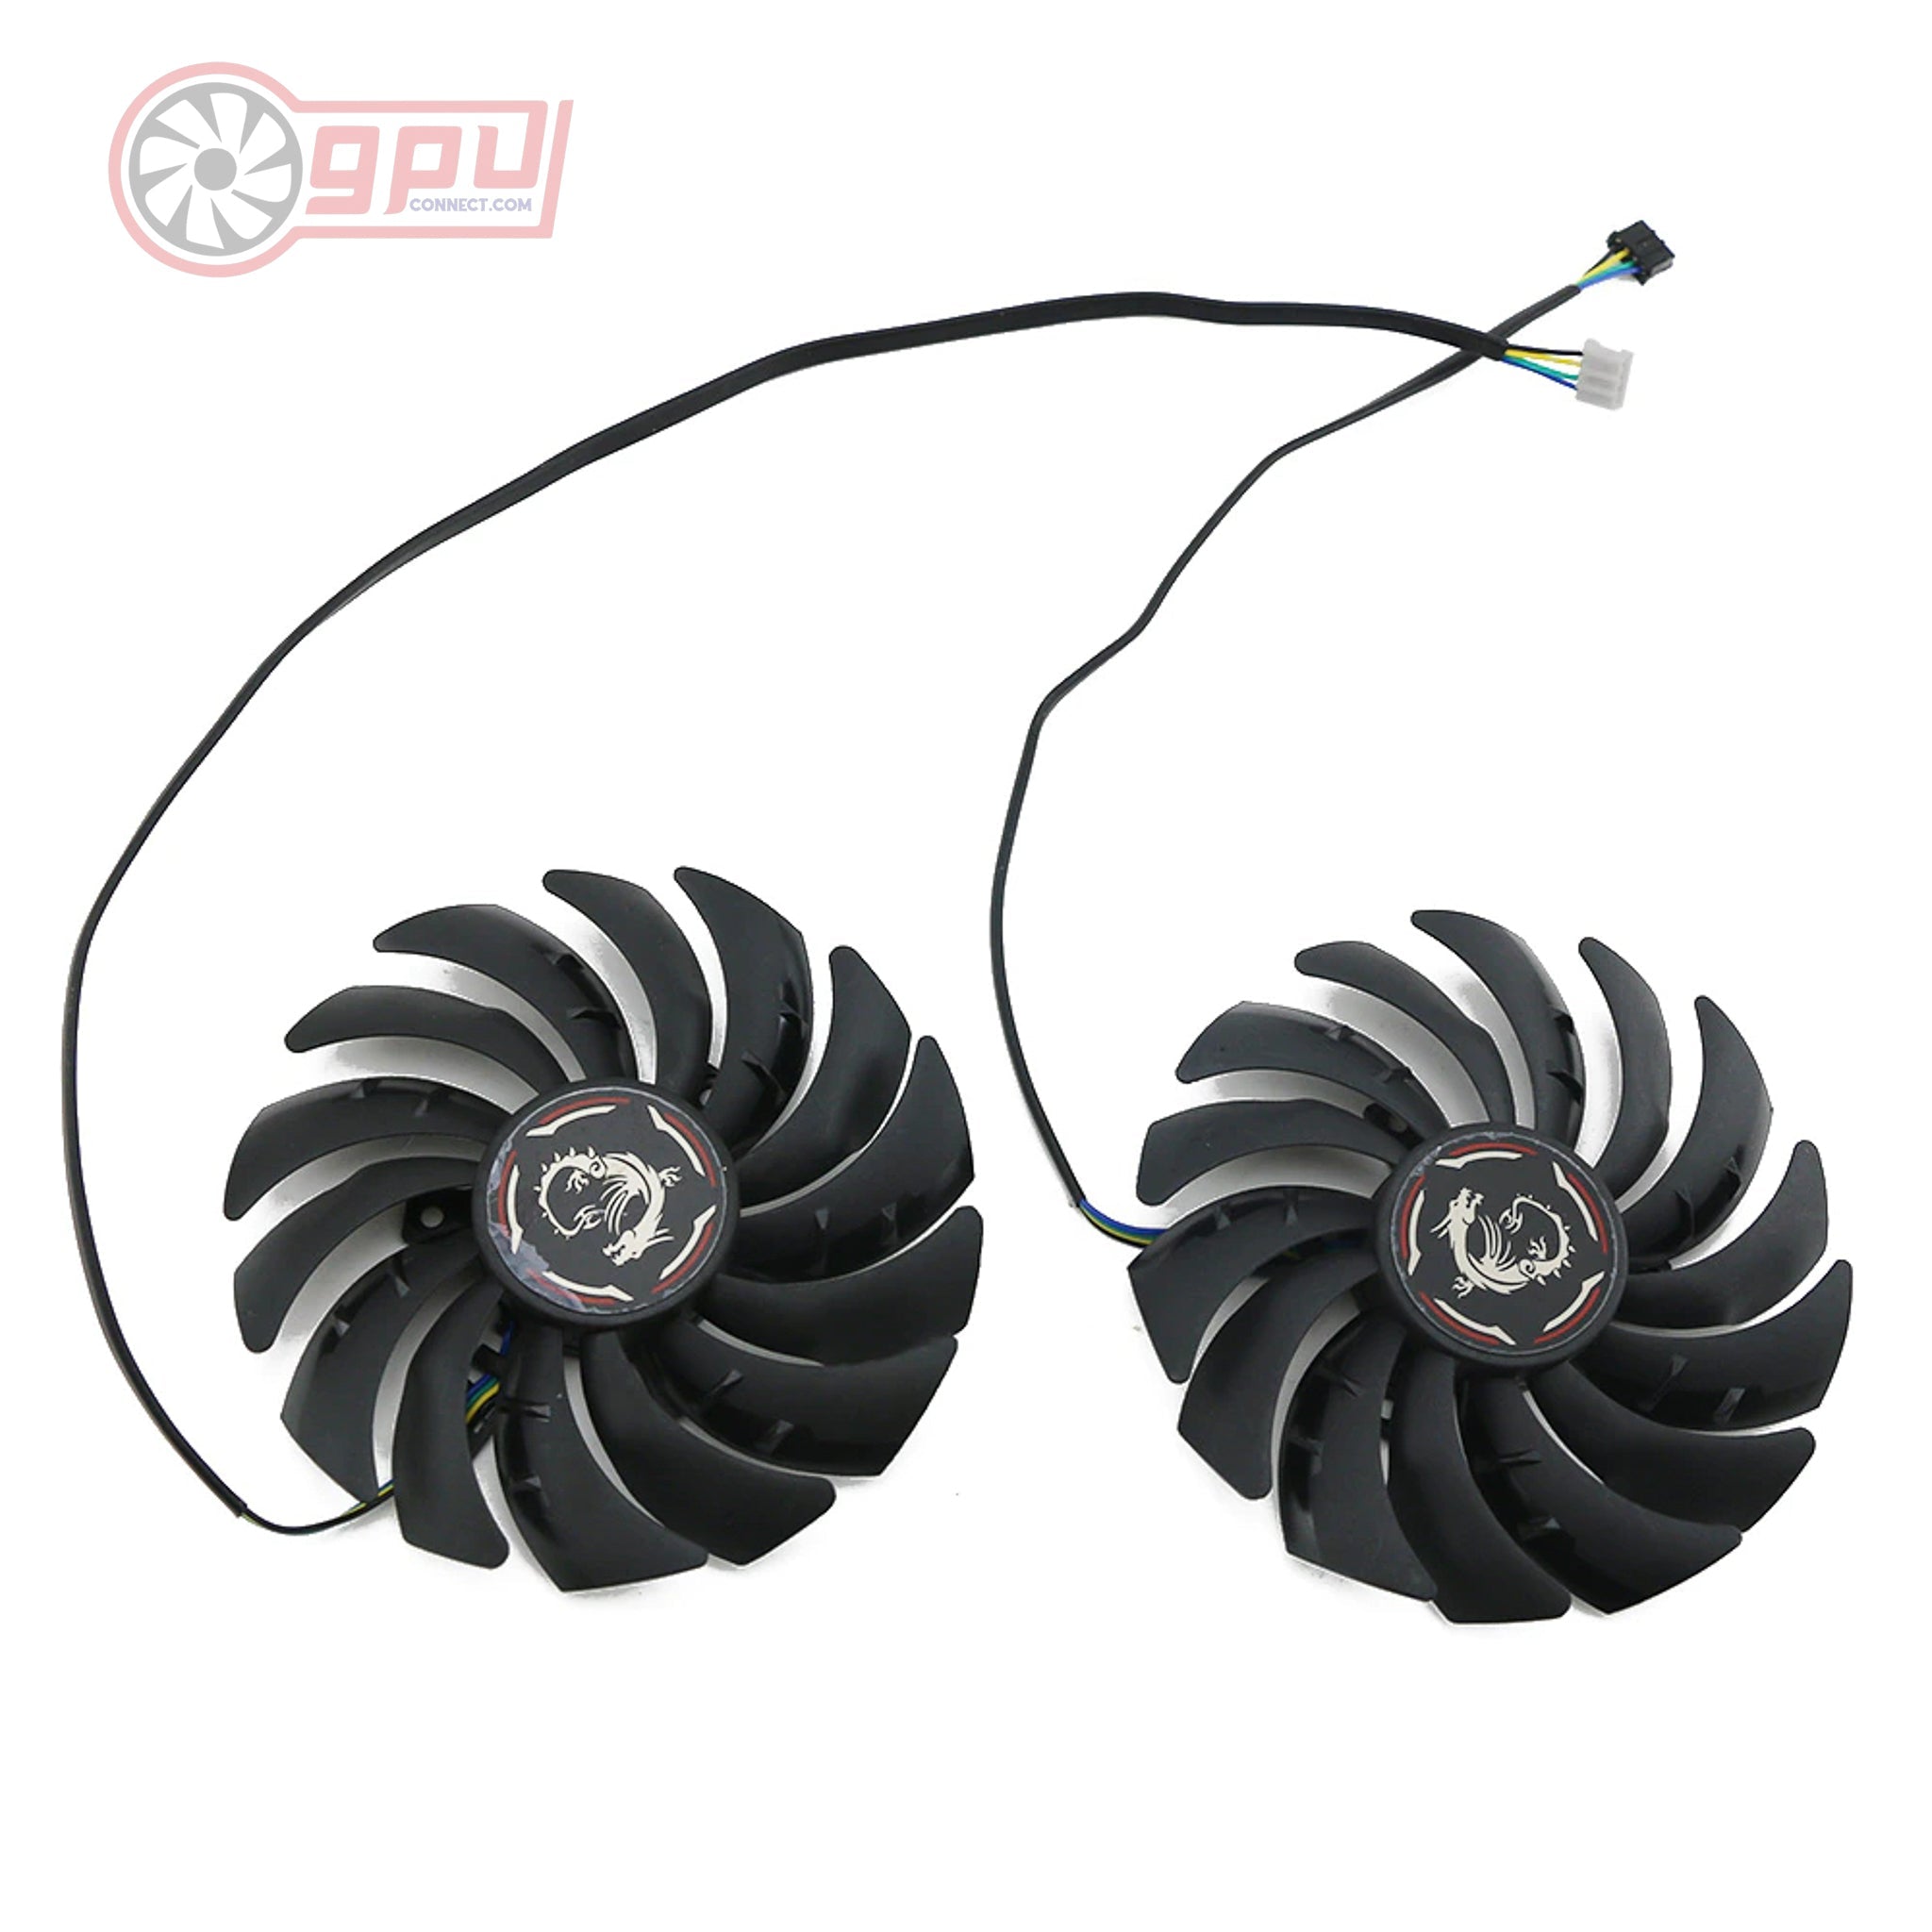 MSI RTX 2070 GAMING Z Replacement Graphics Card Card Cooling Fan – 